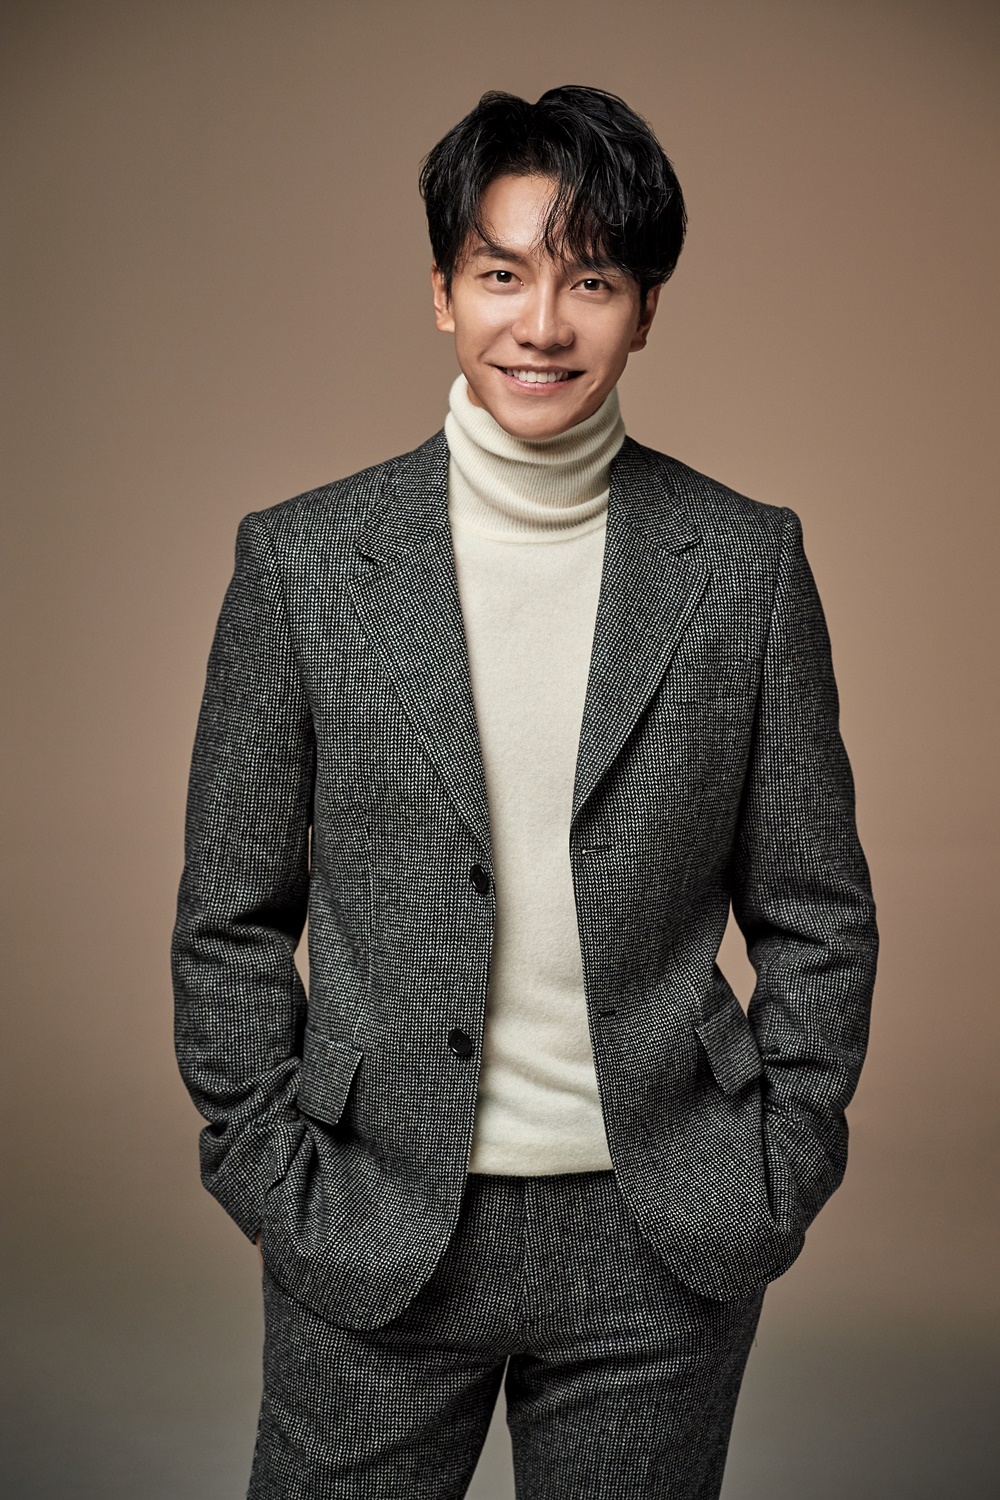 SeoulLee Seung-gi, a singer and actor and entertainer.Lee Seung-gi, who thrilled the sisters of All States in 2004, became an entertainer in his 15th year of debut.In the meantime, he has been loved as a star by inscribing three titles of singer, actor, and broadcaster in front of his name without shame.After the military, he opened his second act of entertainment activities with his unique sincerity and enthusiasm. SBS All The Butlers and tvN Hwa Yugi Netflix Baro you!, followed by SBS Bond as Action Actor .In the Bear Bond, which is the end of the Choi, the rough man who digs into the secret of his nephews death has added a new look to Lee Seung-gi, who was an image such as The drama also achieved a 13% (based on Nielsen Korea All states) rating and added a record of success to the filmography.I met Lee Seung-gi, who successfully completed Bond of Boats. Lee Seung-gis many troubles were buried in a sincere answer and a serious attitude that added wit.This year, I was worried about how to live with Lee Seung-gi and Lee Seung-gi, who are thirty-three entertainers and entertainers.I am a little tired after the time I caught myself to do too well, and I realize the importance of down.Its the story of Celebrity Lee Seung-gi and 30-three-year-old Lee Seung-gi.- As for the evaluation that the change of Acting seems to have been made naturally.- It has been a long time since I was a singer.- What about singing, performing, and acting?- Netflix Baro you of the criminal! Season 2 also joined.- All The Butlers is already 100 times ahead. It will not be easy to work with drama.- The entertainment award received last year is the Engine of Youth. If you expect the results of this years Acting Award.- In the past, I have been aiming for three objects: Acting, Song, and Entertainment.- What is the Engine of Youth that makes the work continue without rest.- I dont think I have much experience of failure. Theres a crisis coming.- The man who turns to you...-Love is one. If you rely on someone close to you, you rely on your lover.- I will not do open love again.- What time is it for Lee Seung-gi?2 Im tired of thinking Lets do well, put it down.